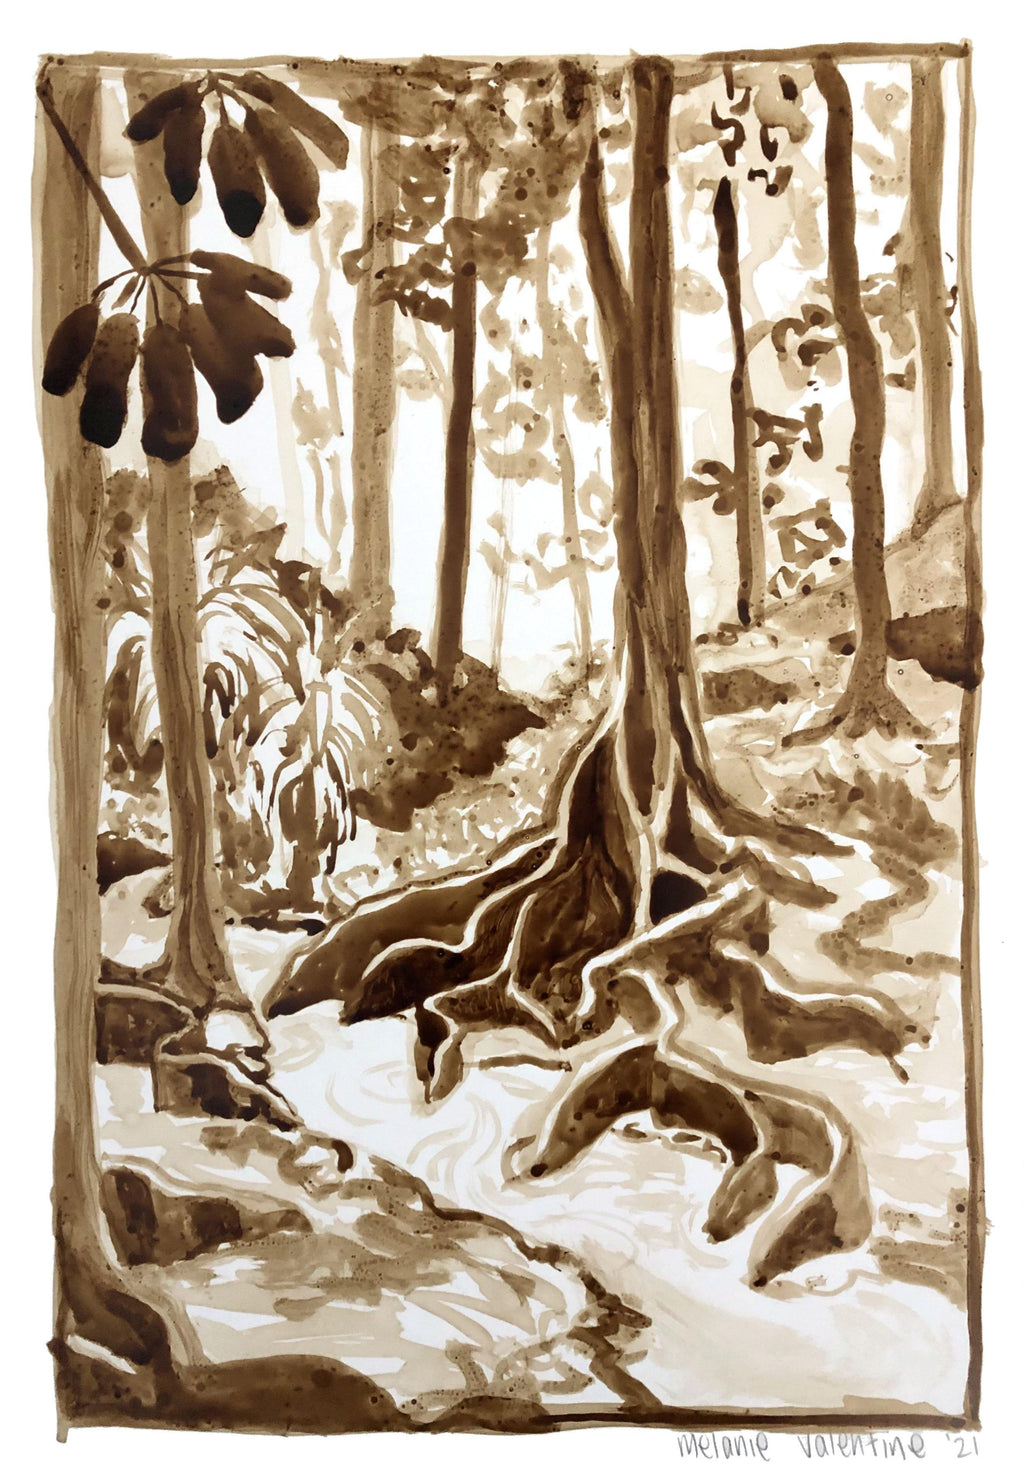 Rainforest drawing painted in sepia brown ink on A3 paper